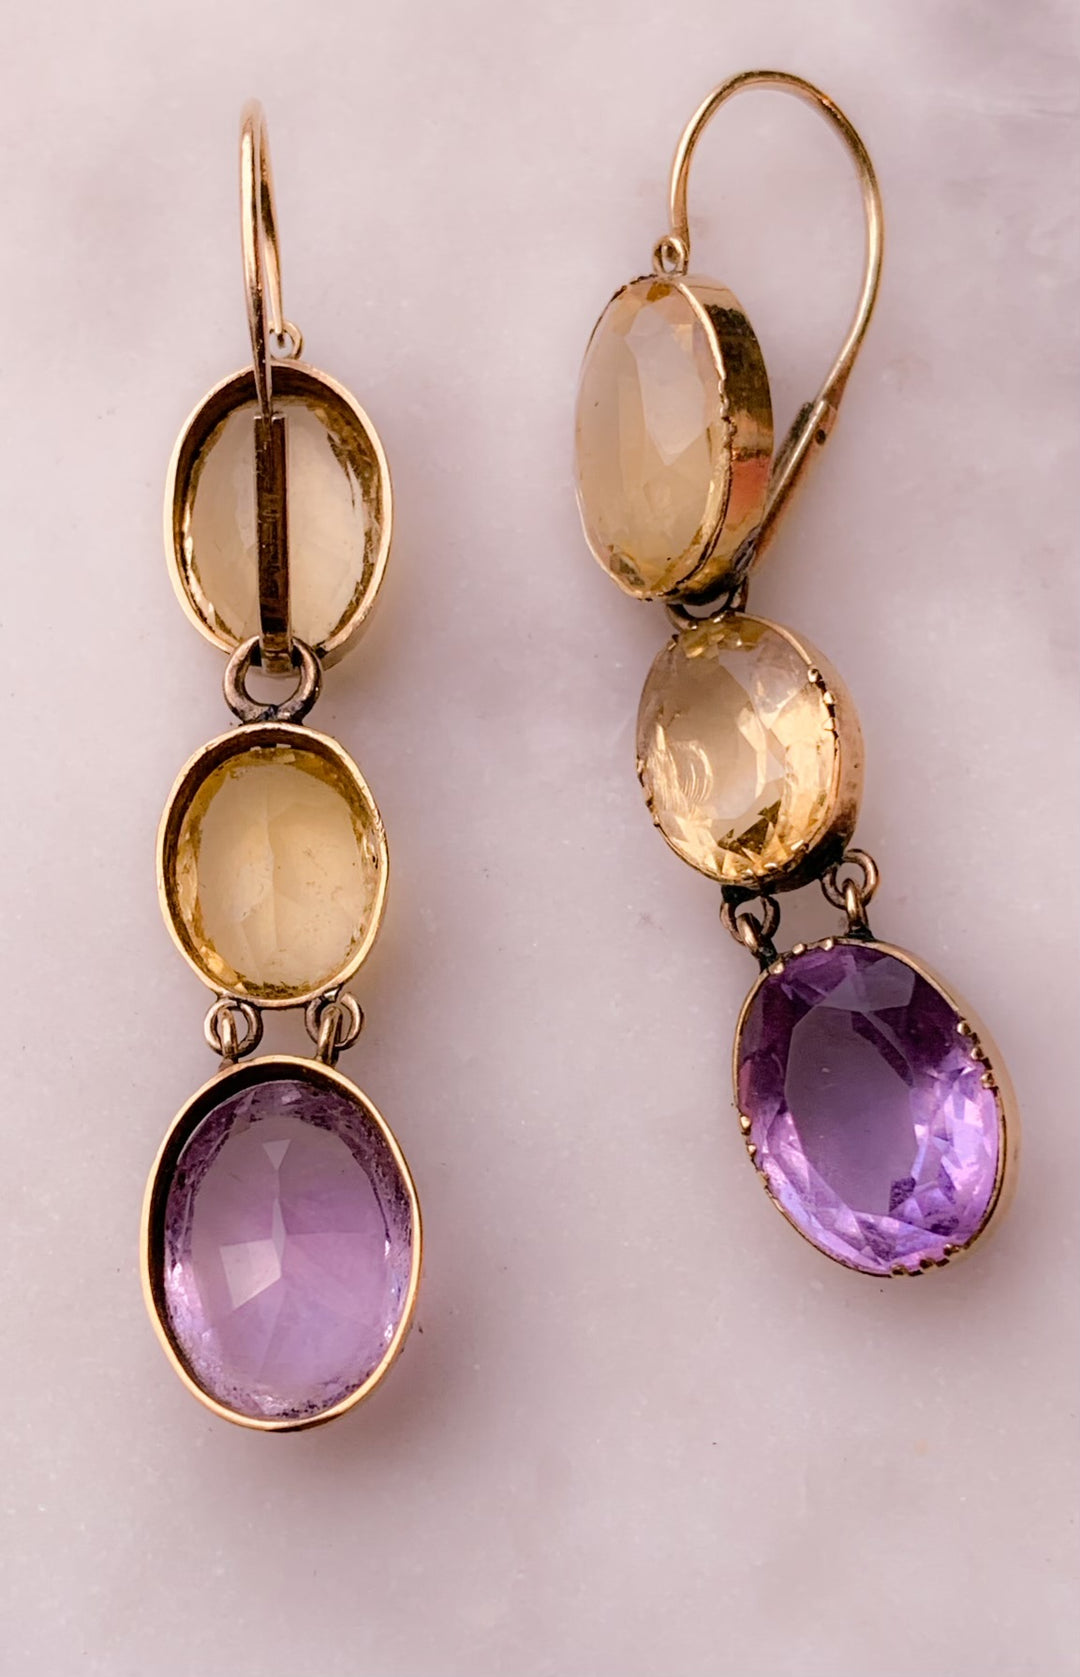 Amethyst and Citrine Day/Night Earrings in 15k Gold